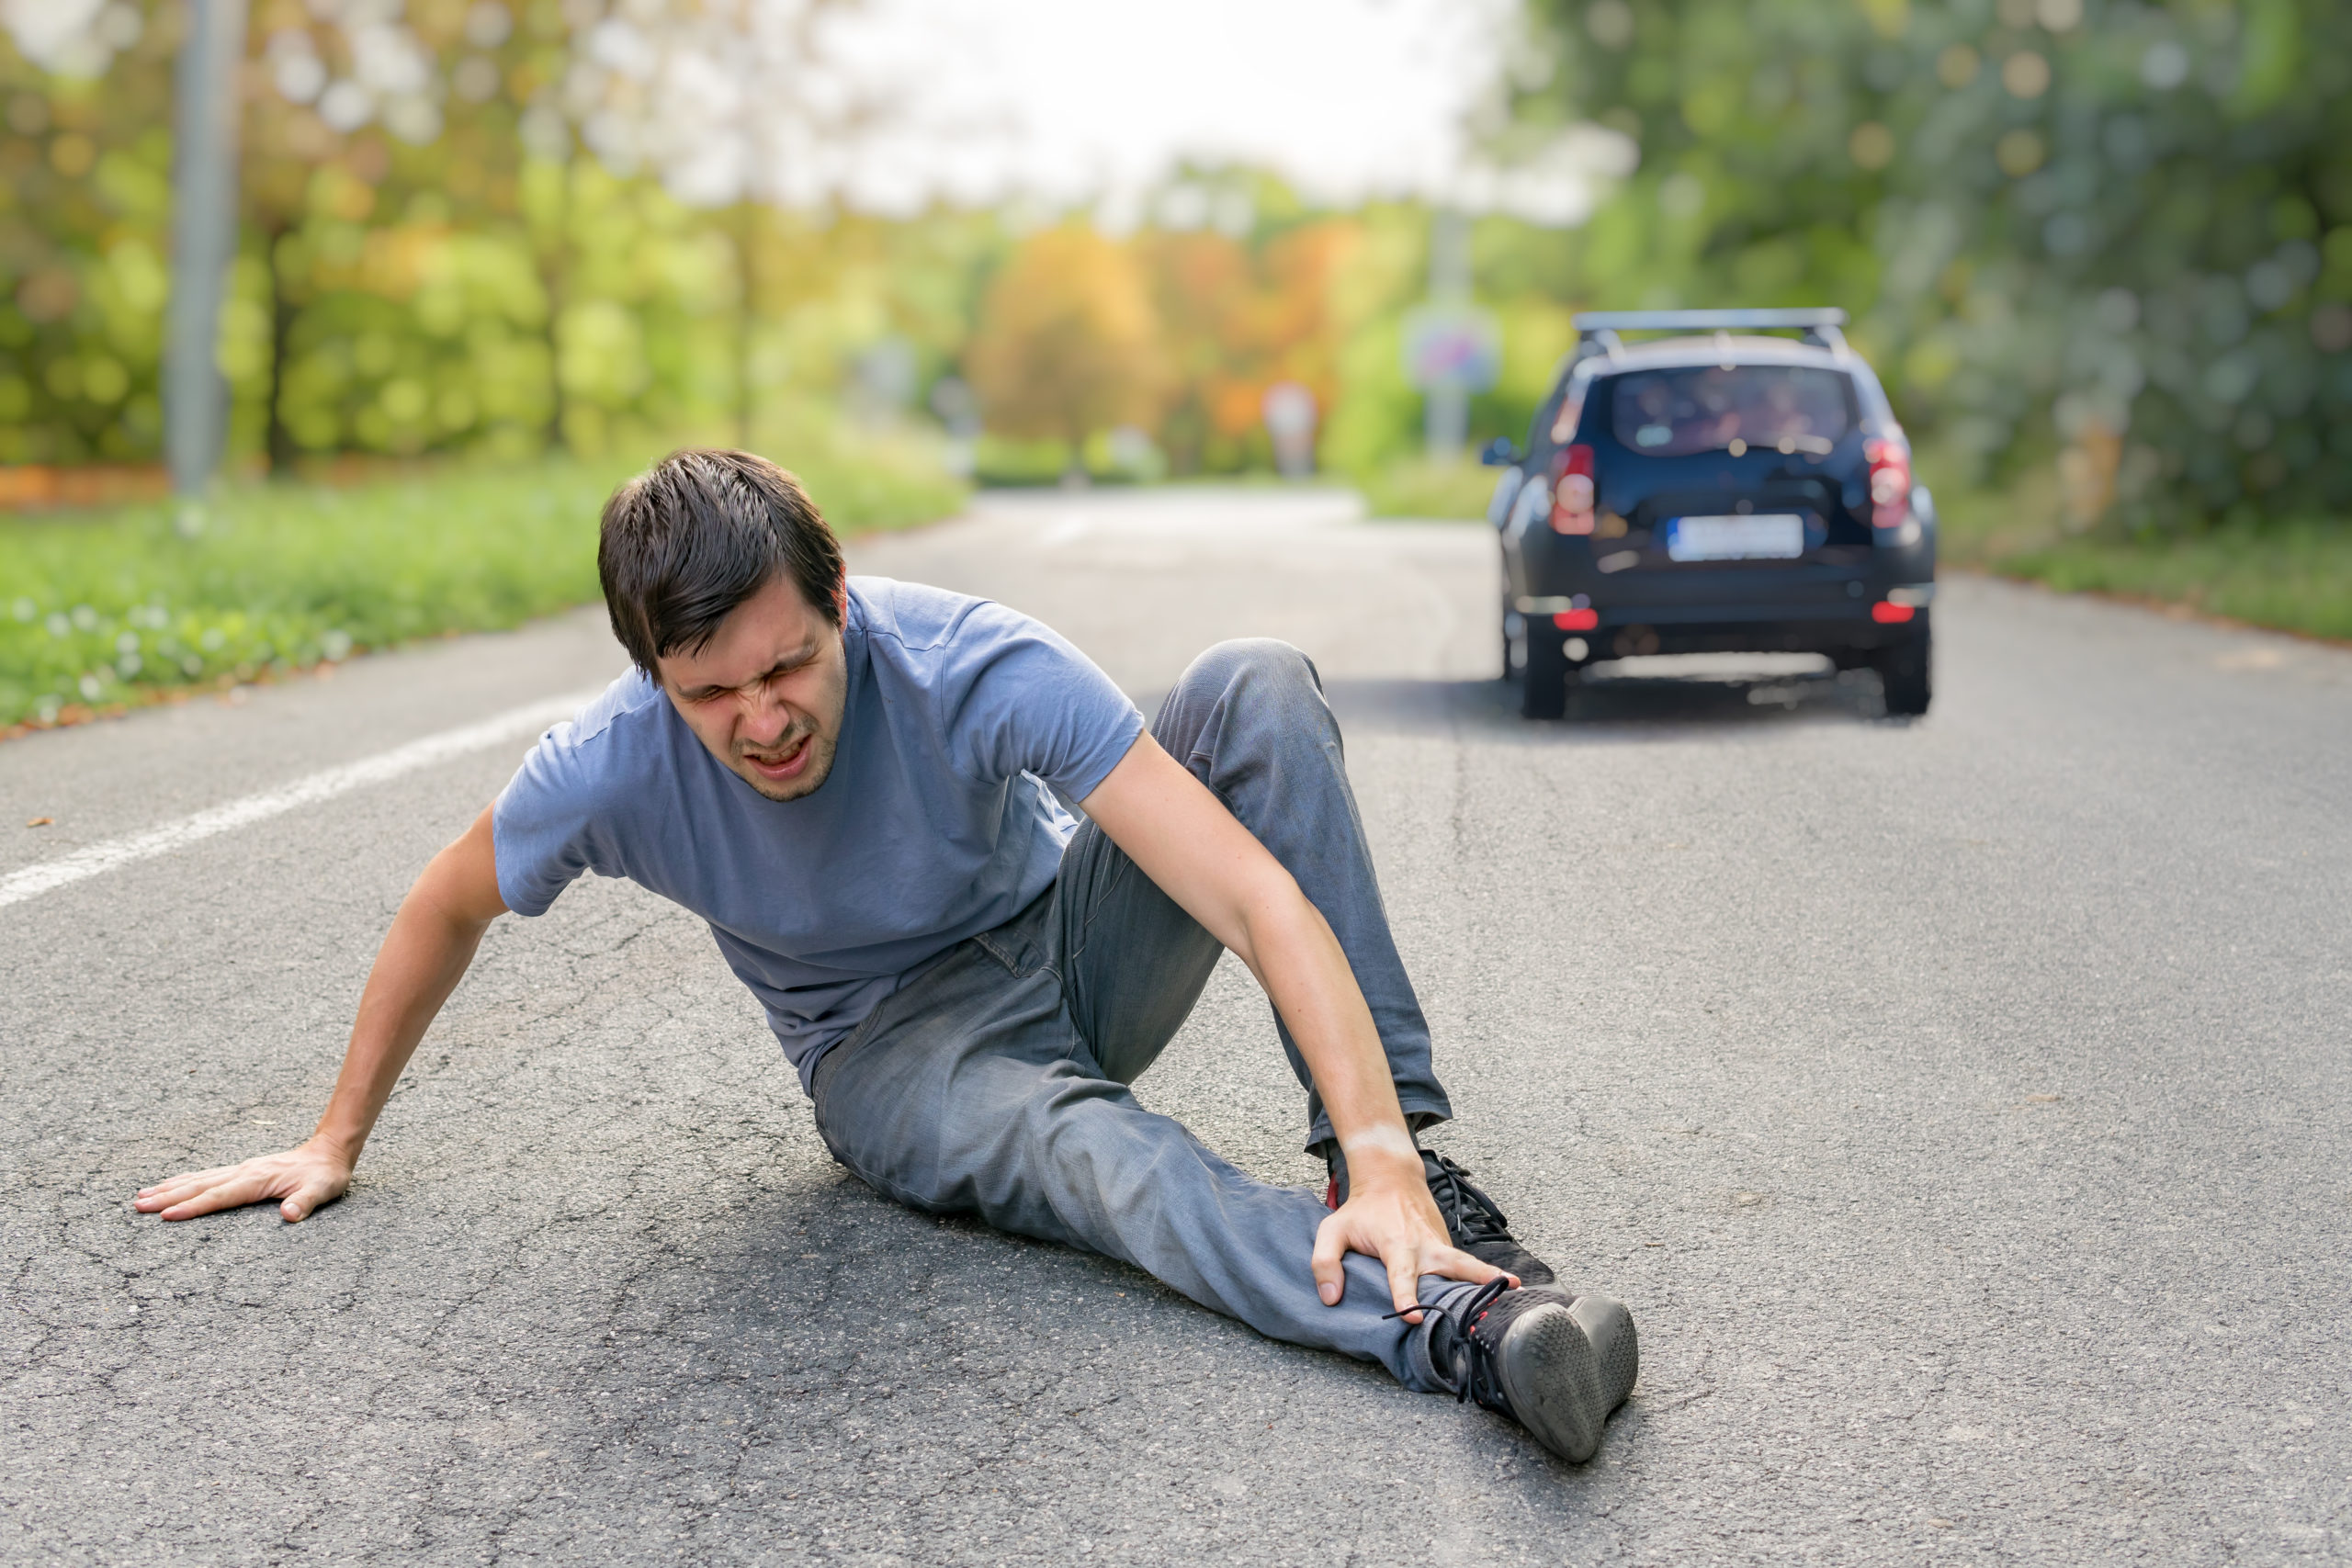 how-long-do-you-have-to-report-a-hit-and-run-in-texas